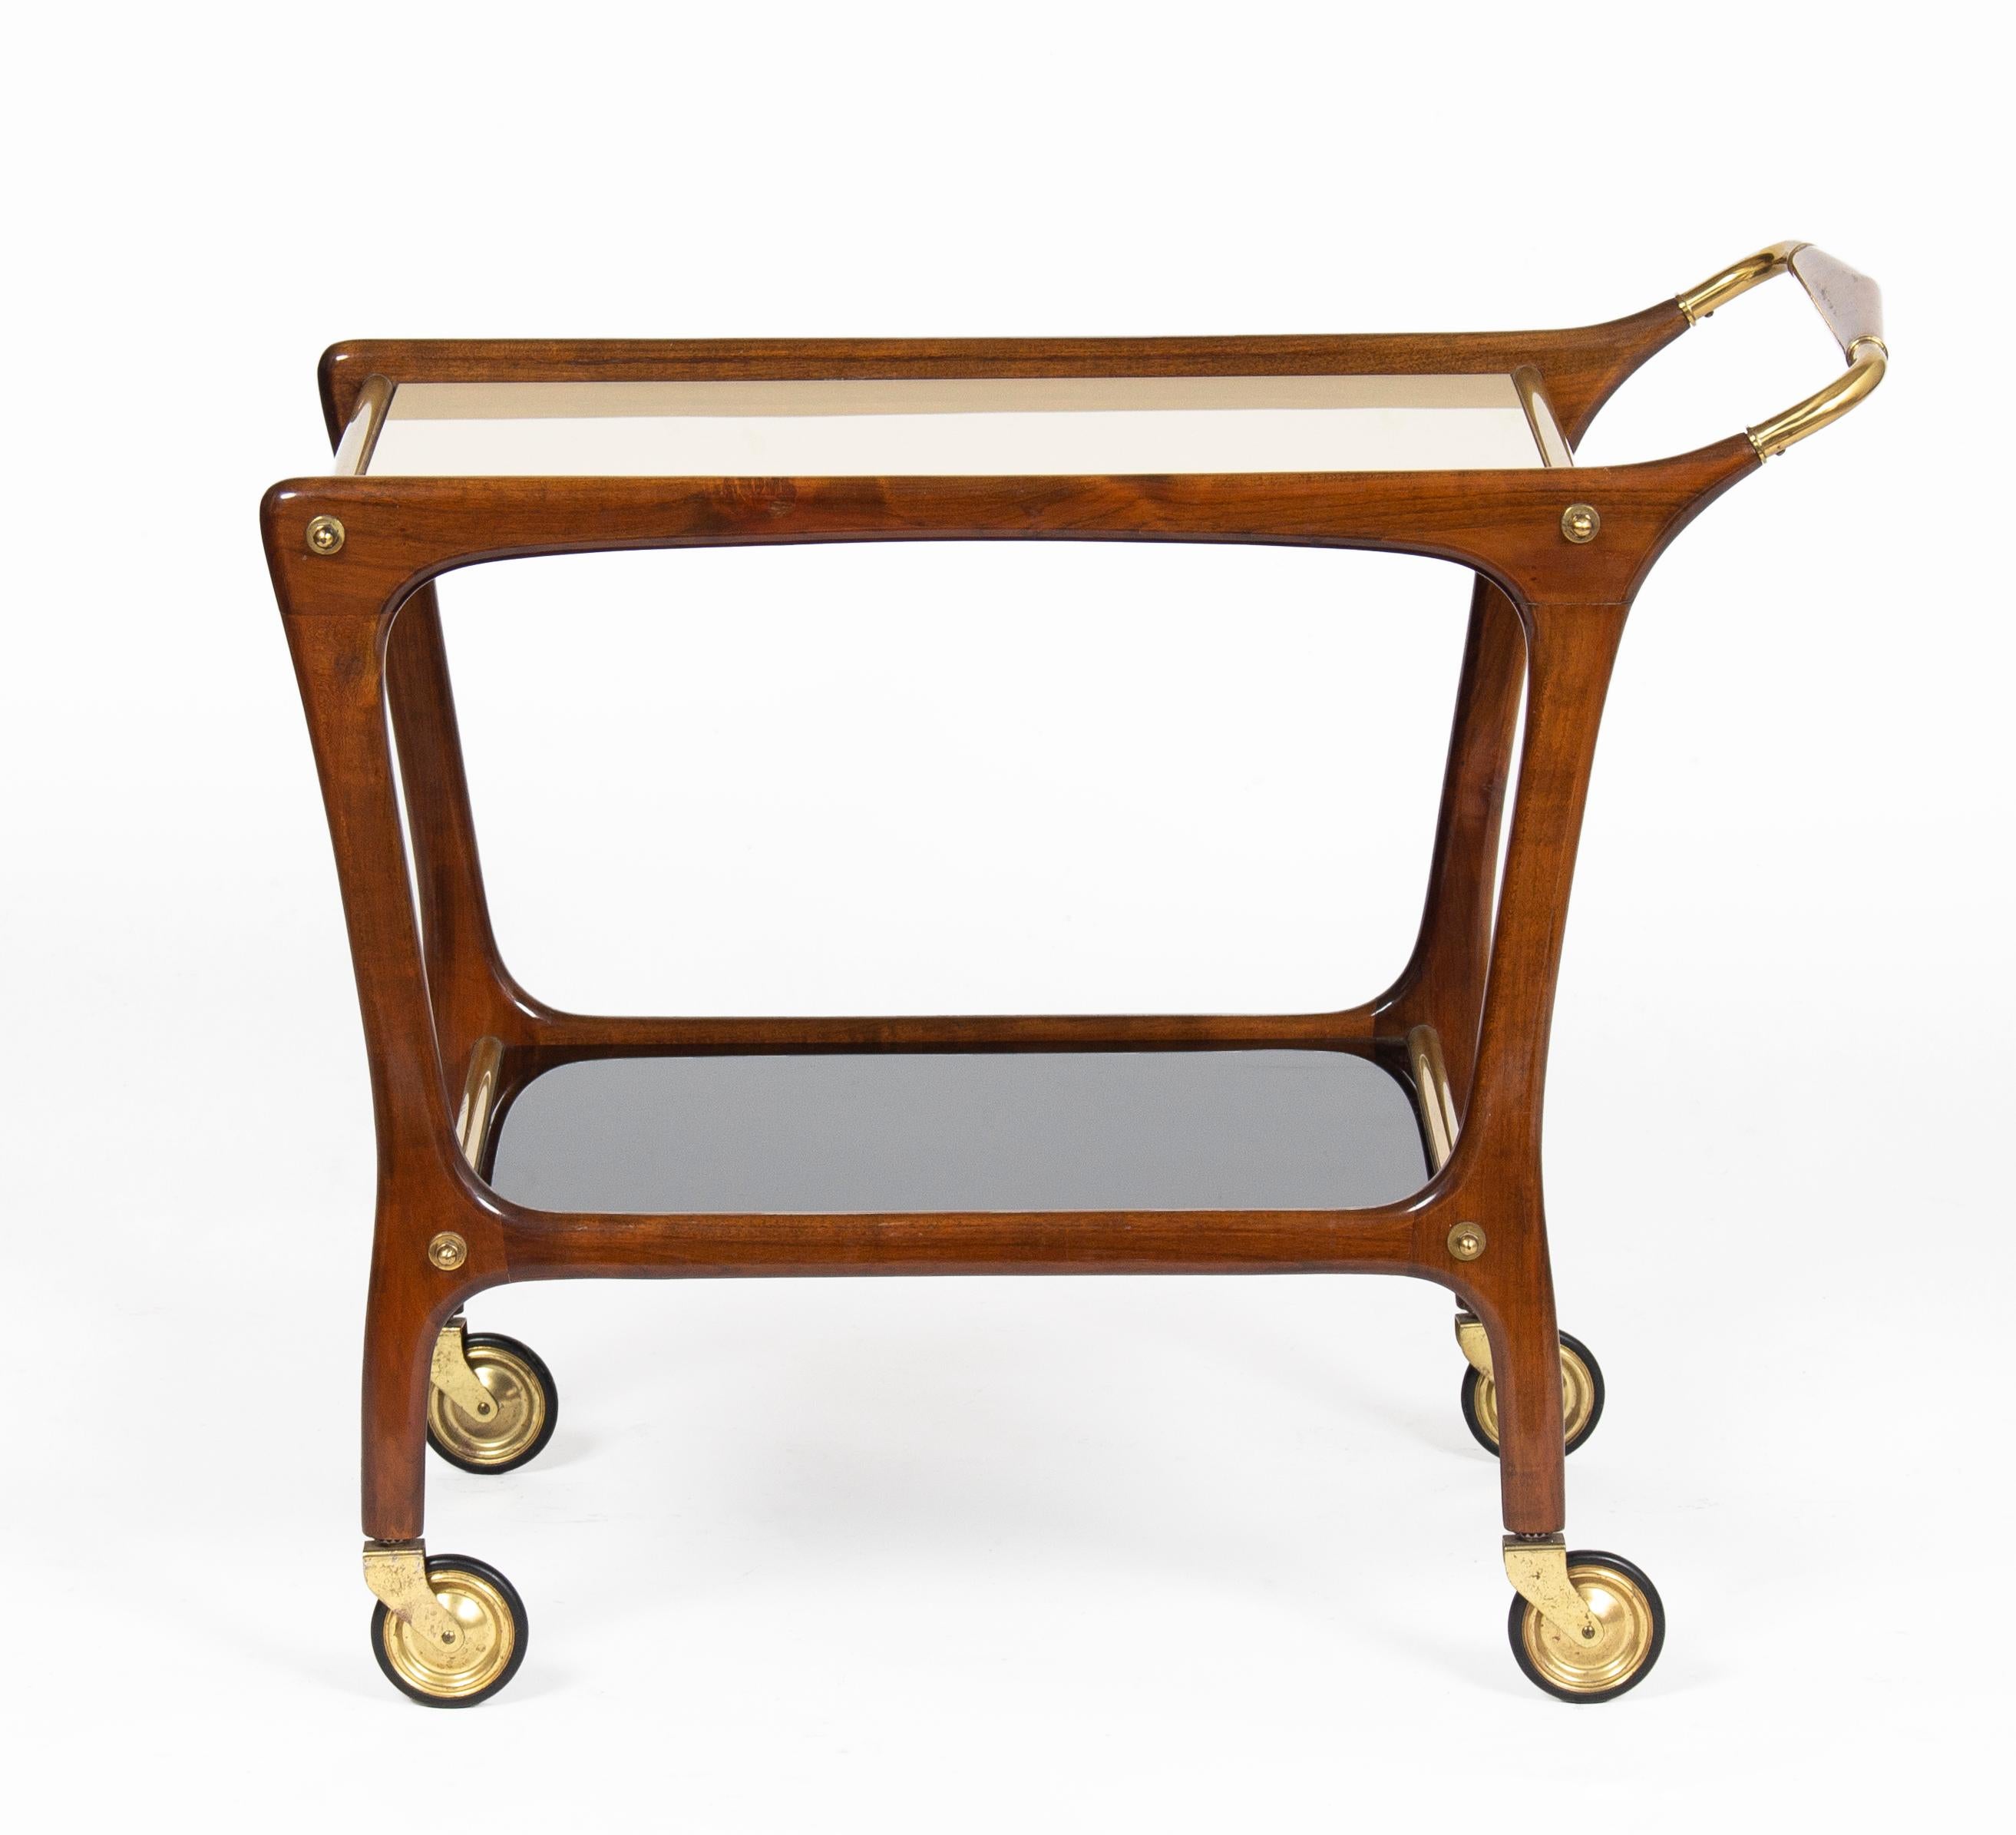 Italian Mid-Century Modern bar cart designed by Ico Parisi, manufactured by De Baggis.